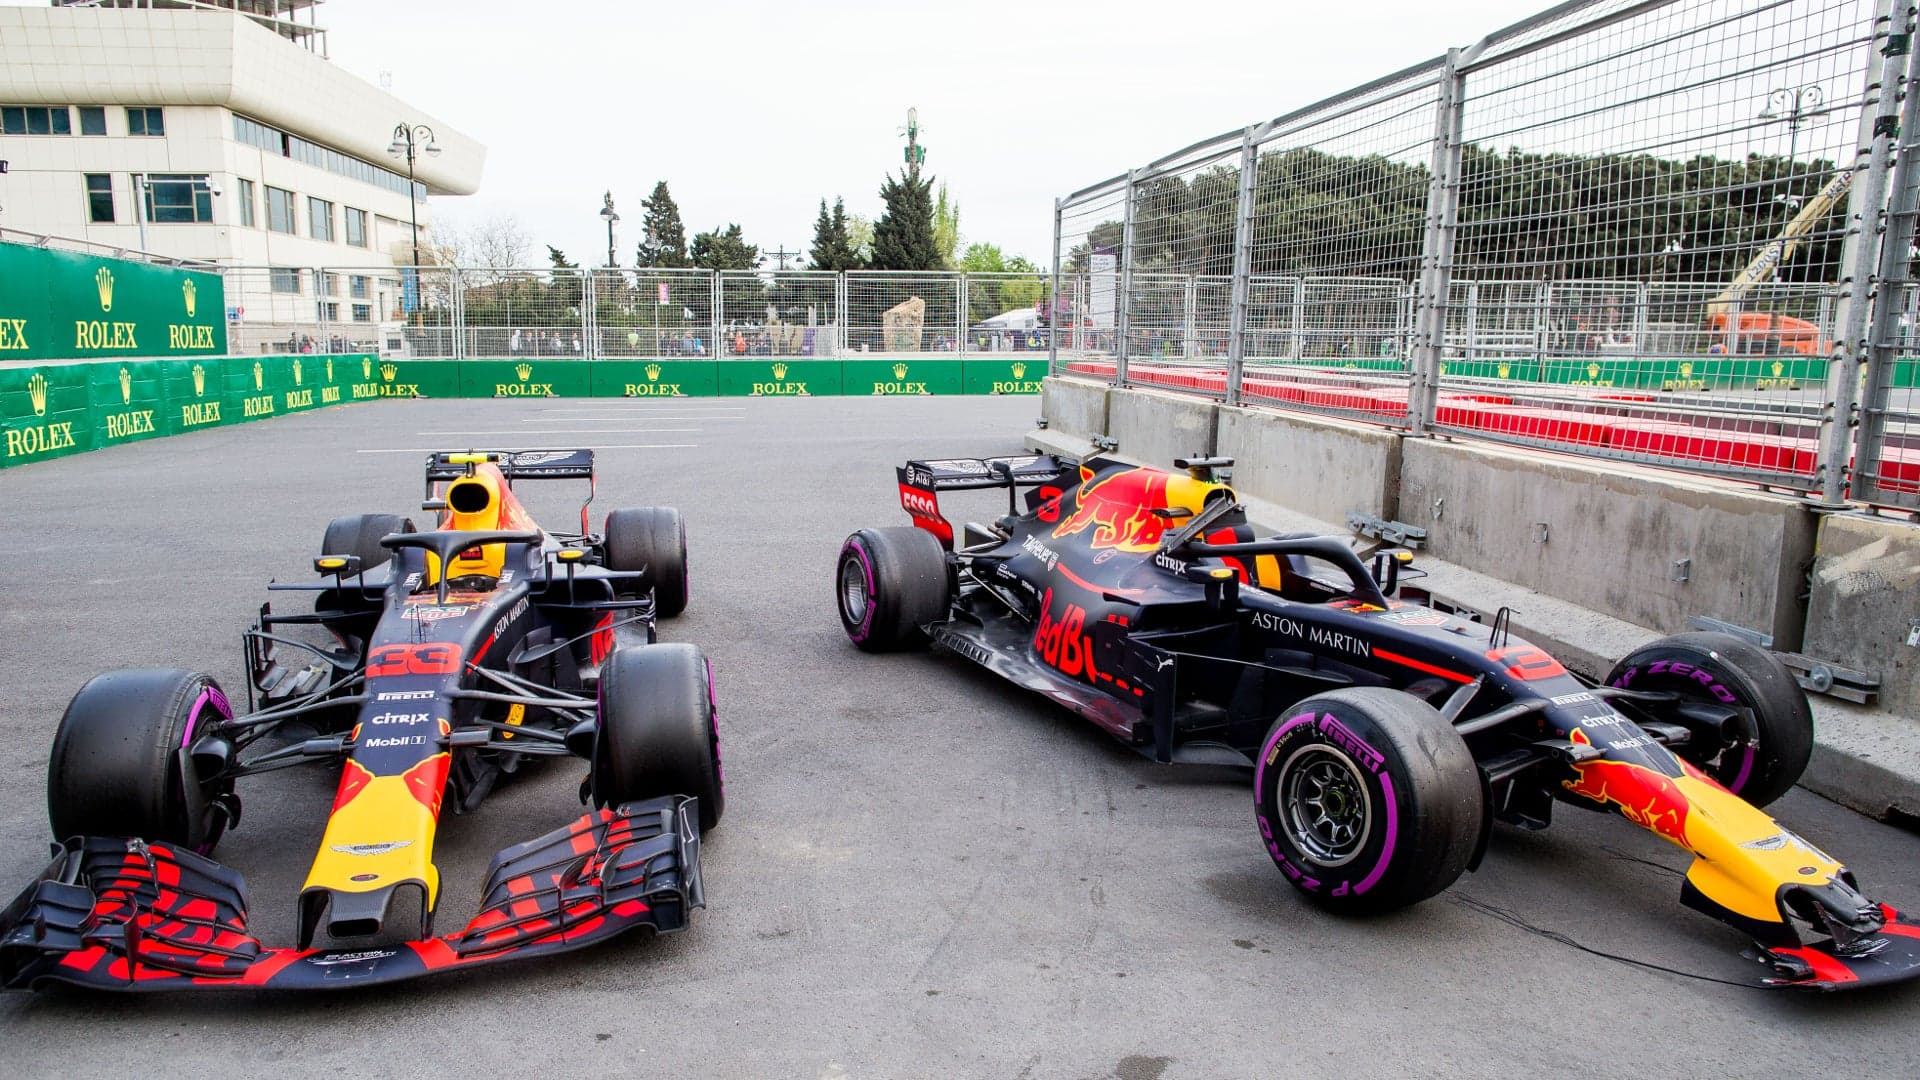 Verstappen: ‘Ricciardo and I Can Still Fight, but Should Be Less Eager Racing Each Other’